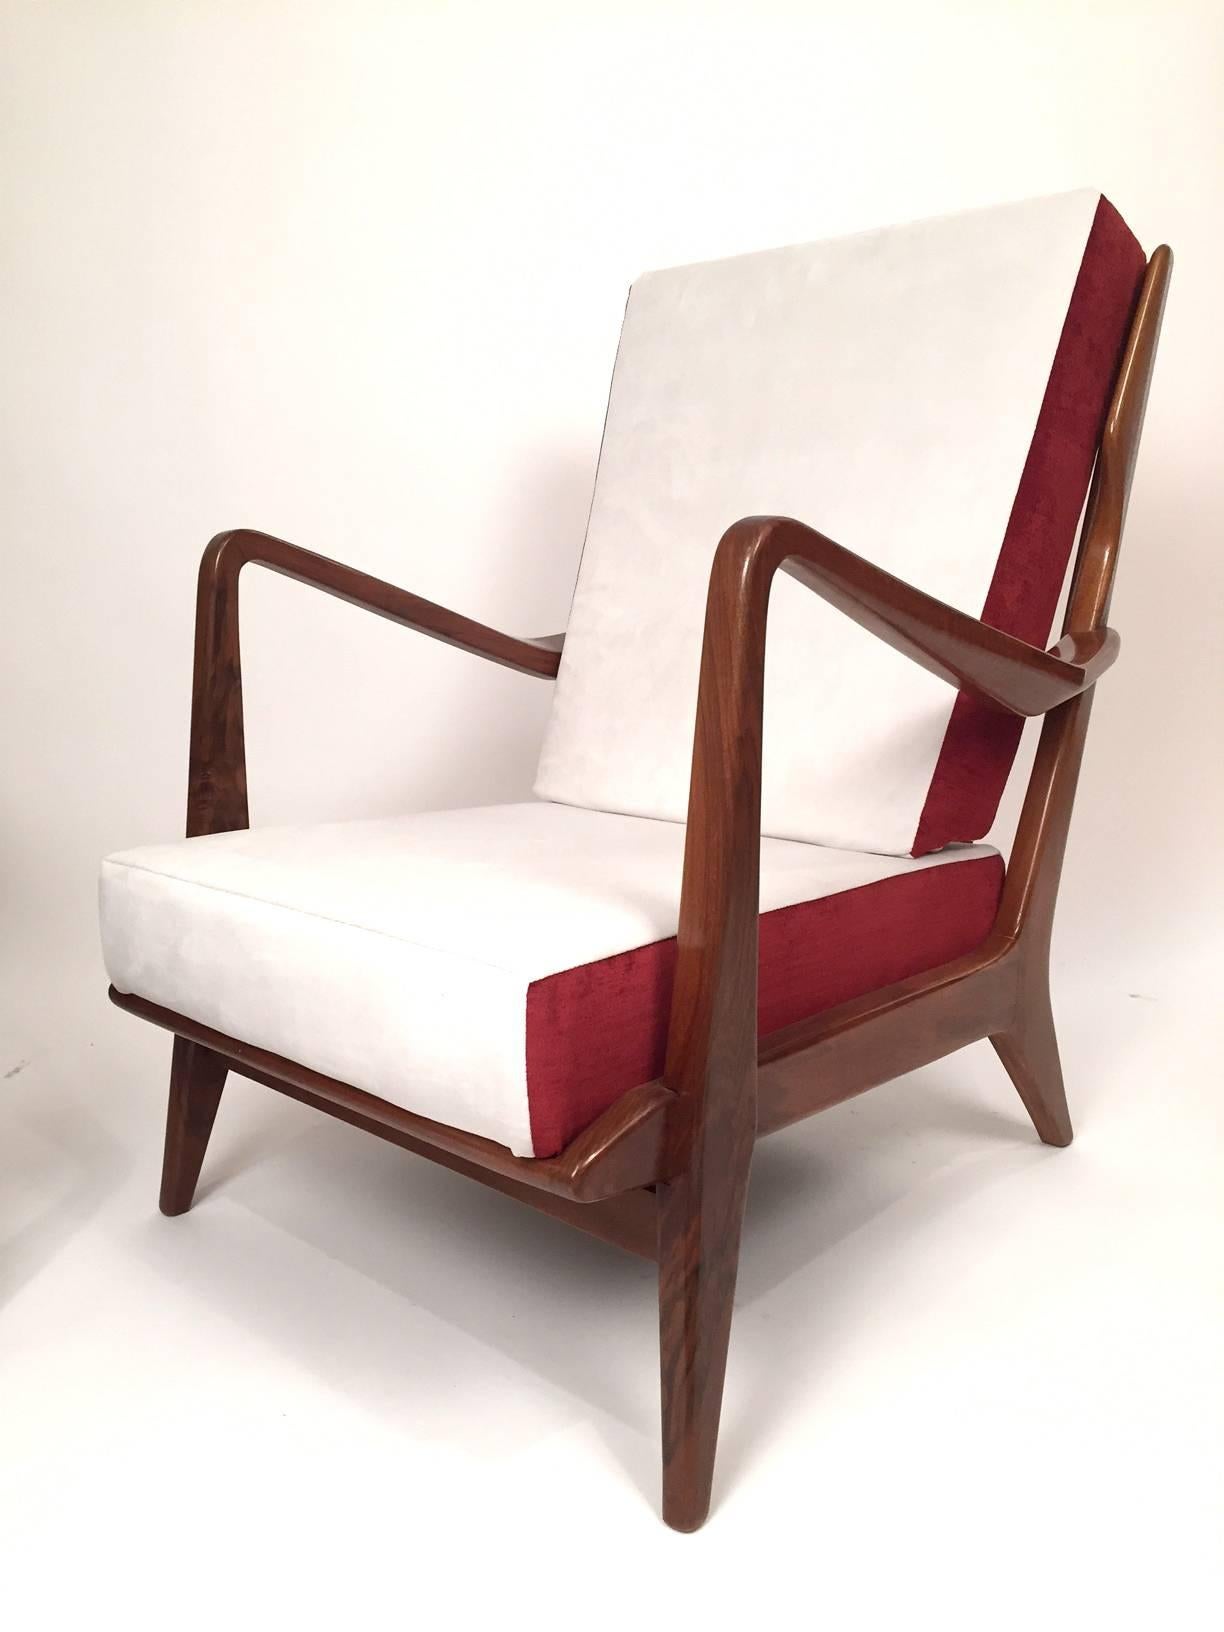 Pair of Gio Ponti Walnut Chairs Model No 516 for Cassina, 1950s 2